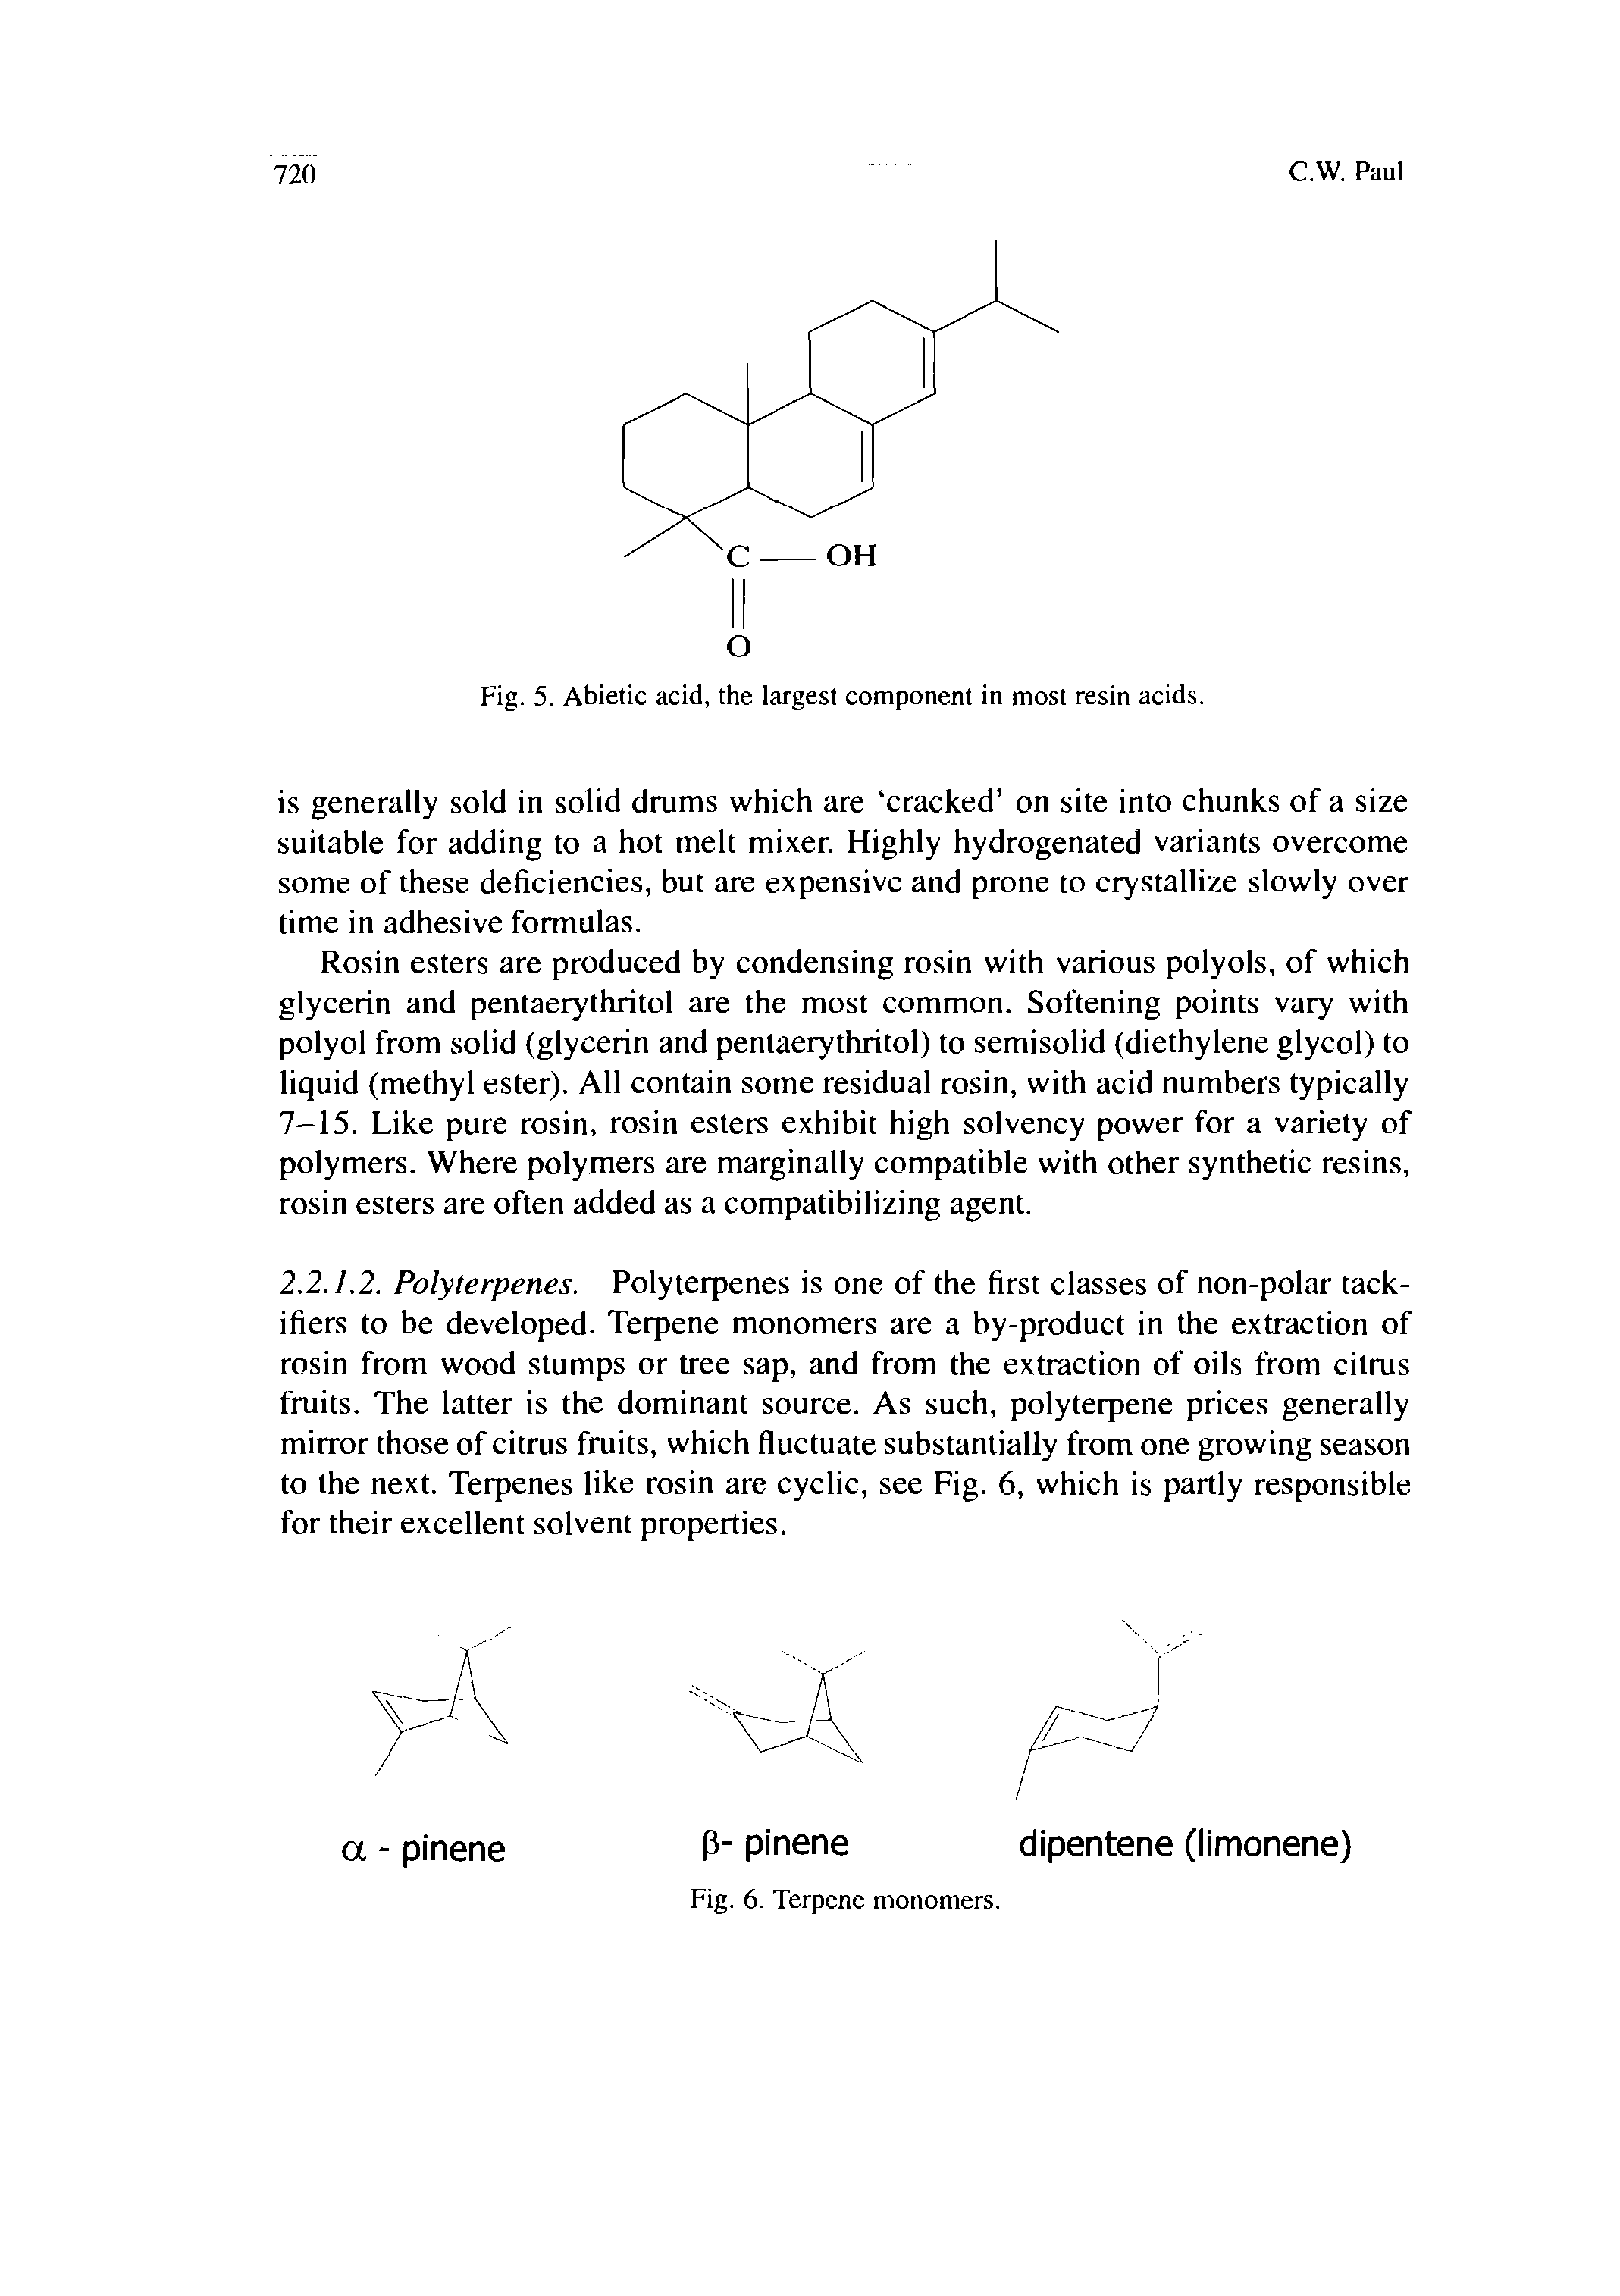 Fig. 5. Abietic acid, the largest component in most resin acids.